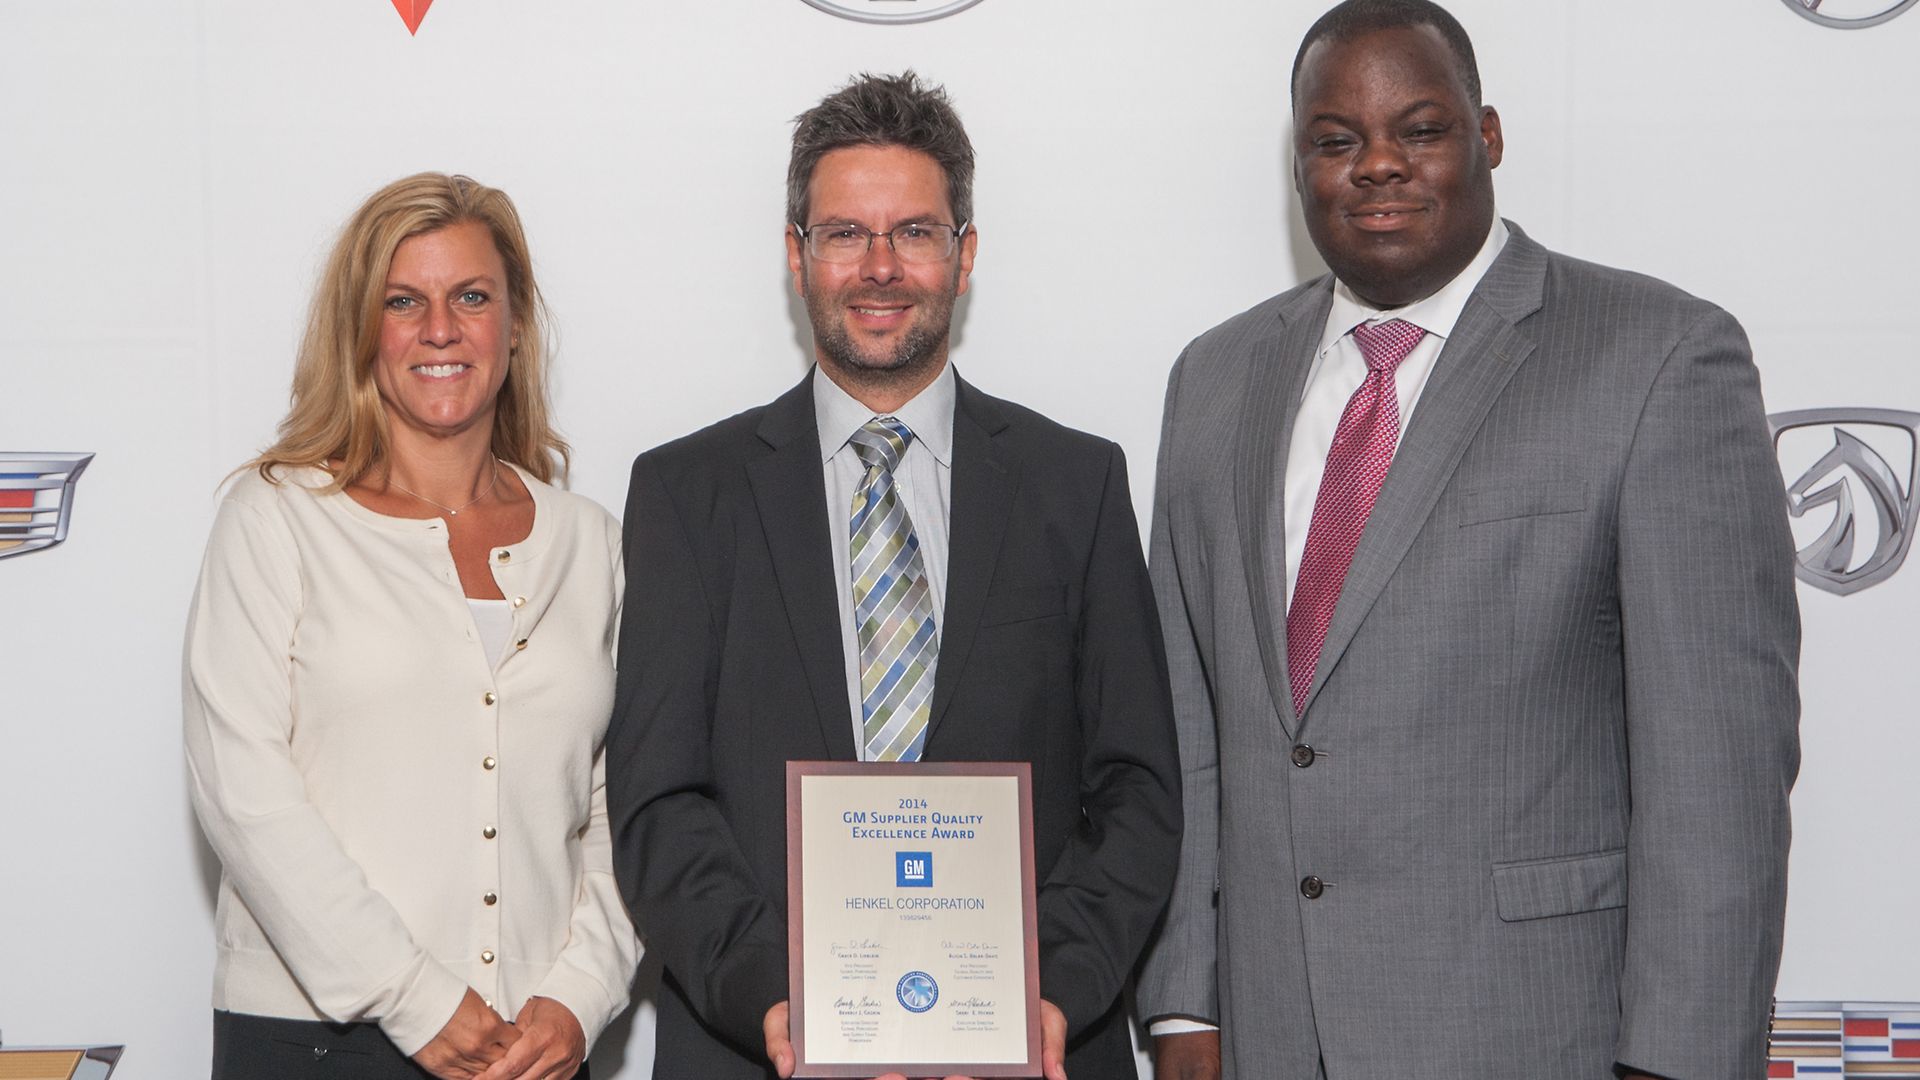 General Motors Supplier Quality Excellence Award